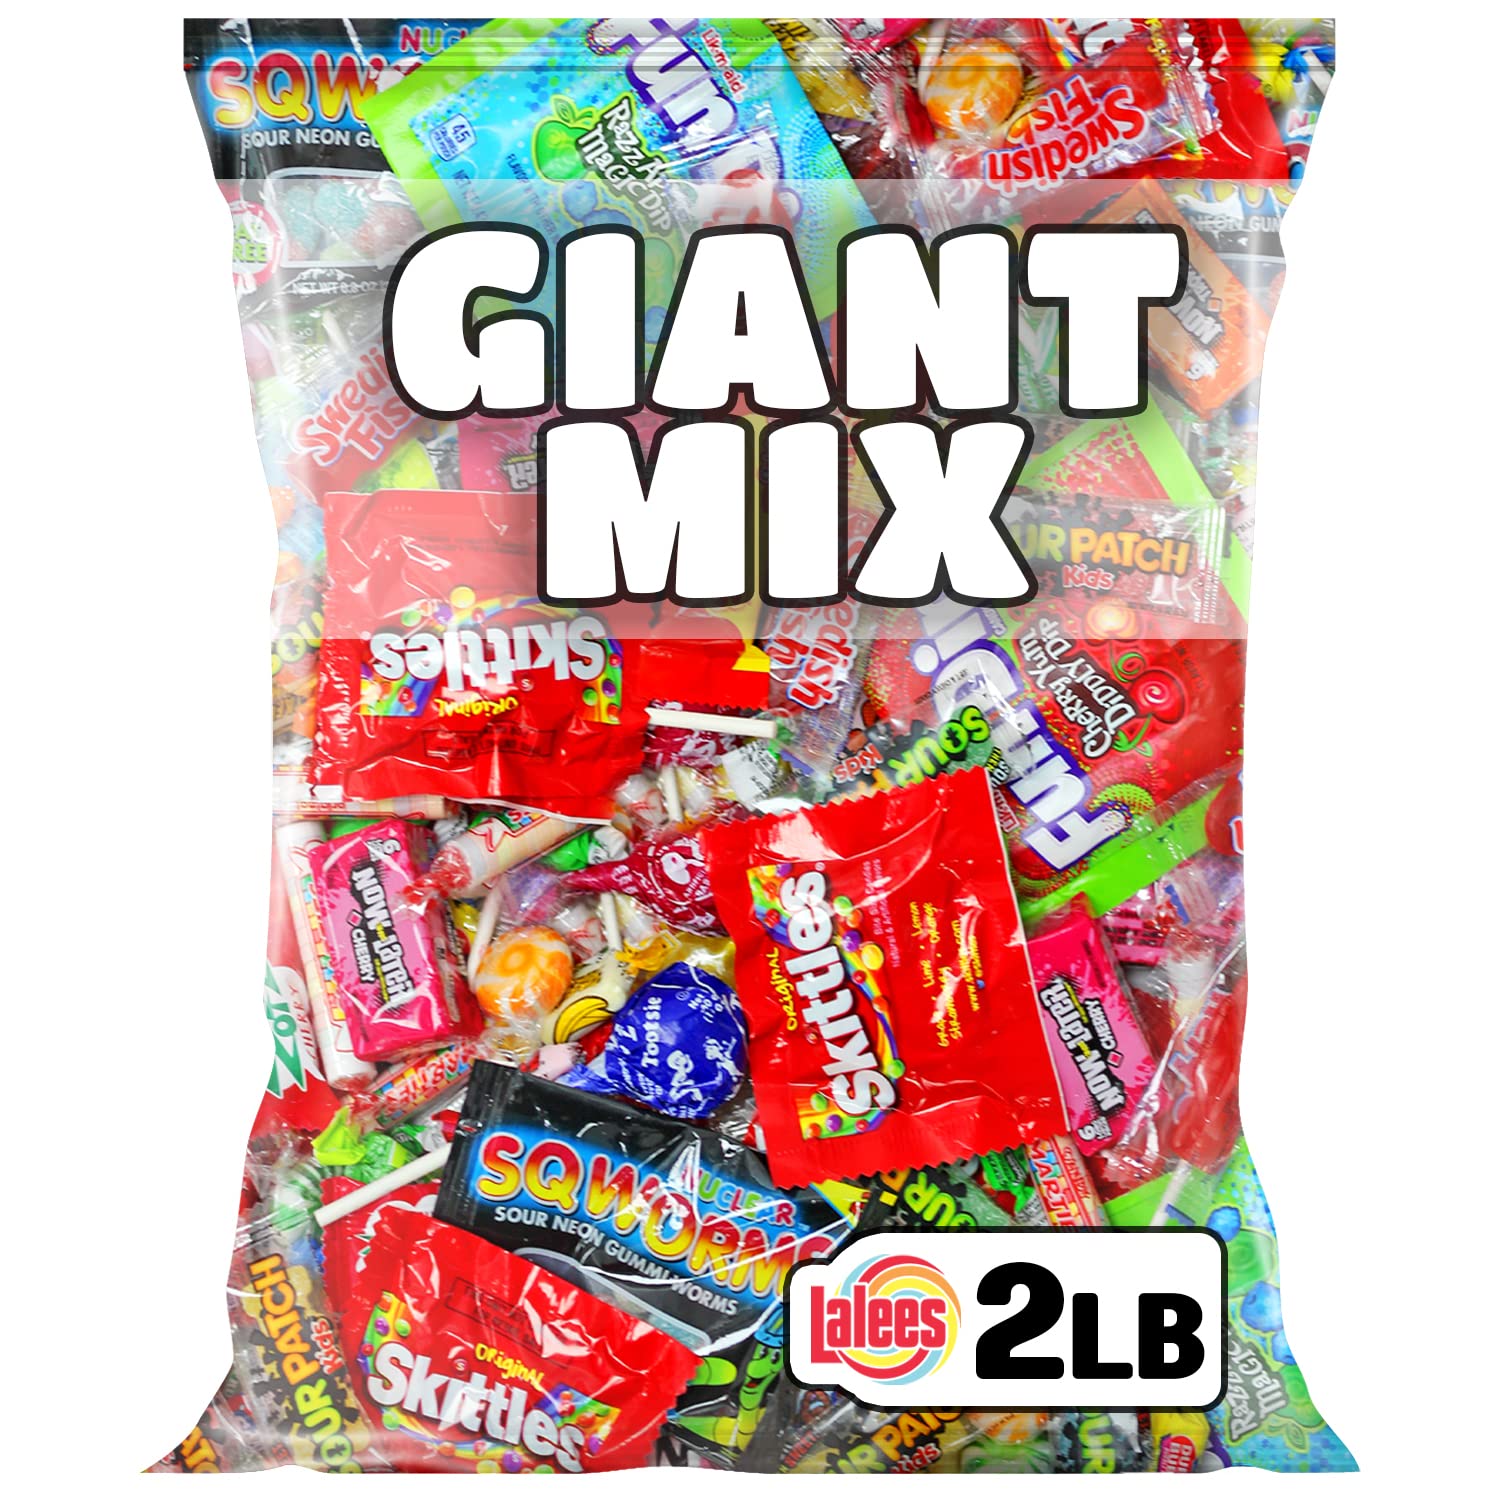 Bulk Candy Bags, Big Bags of Candy